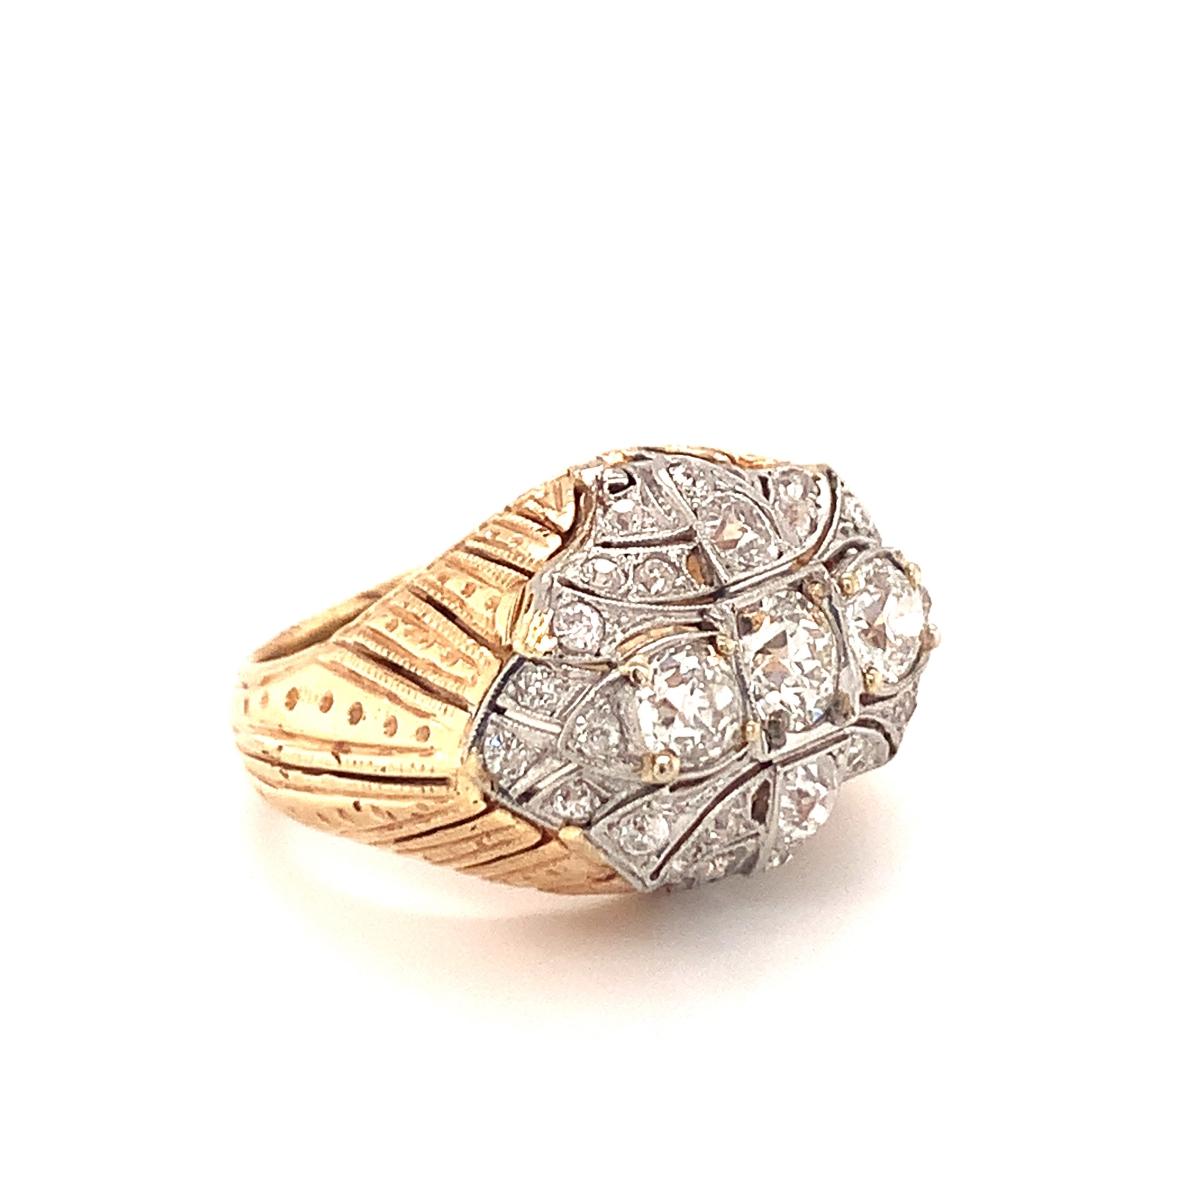 Vintage Diamond Platinum and 18K Yellow Gold Ring, circa 1960s For Sale 3